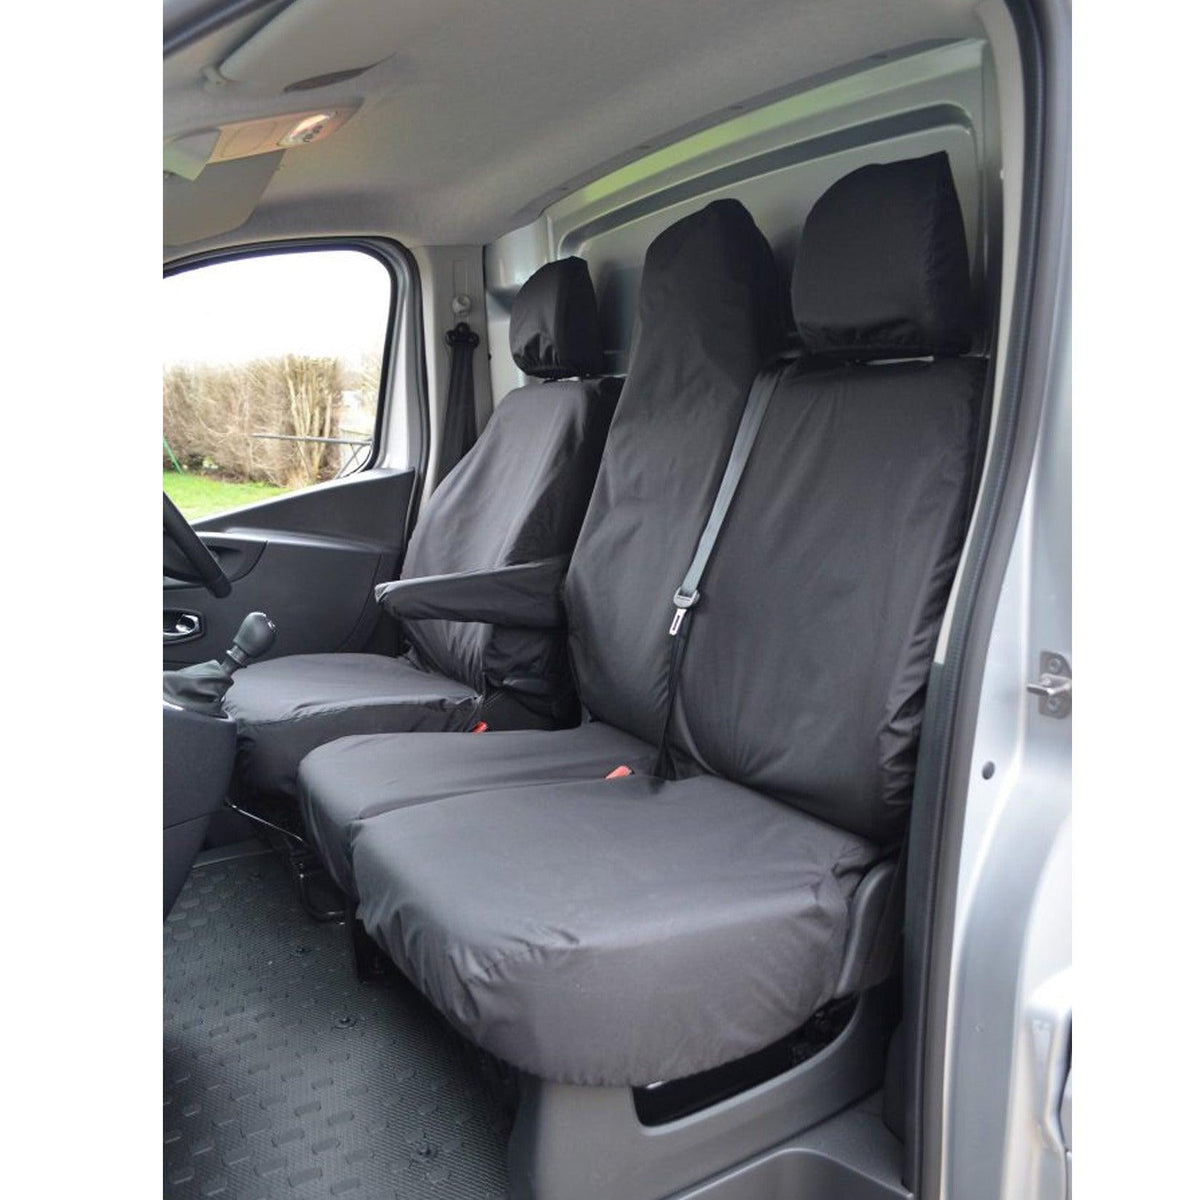 VAUXHALL VIVARO 2014-2019 SPORTIVE DRIVER AND FRONT DOUBLE FOLDING PASSENGER SEAT COVERS - BLACK - Storm Xccessories2